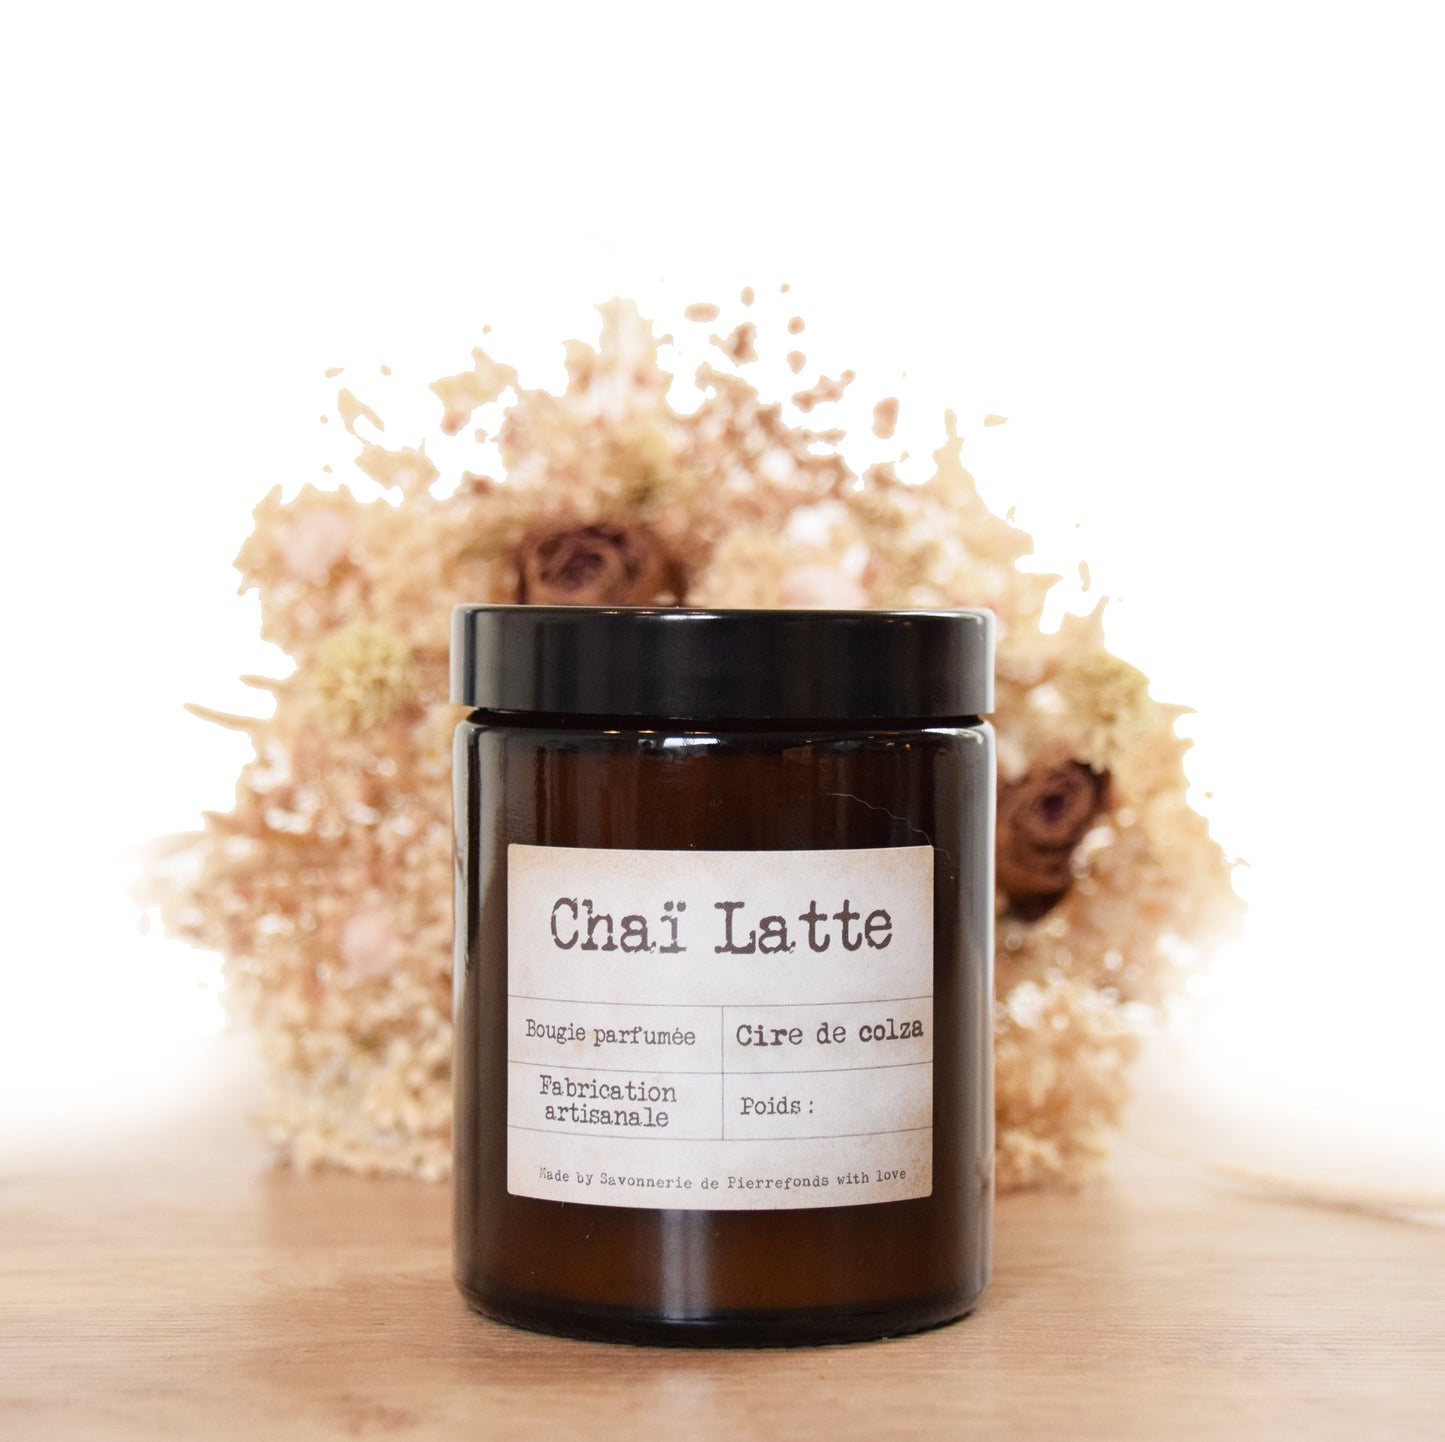 "Chai Latte" scented candle